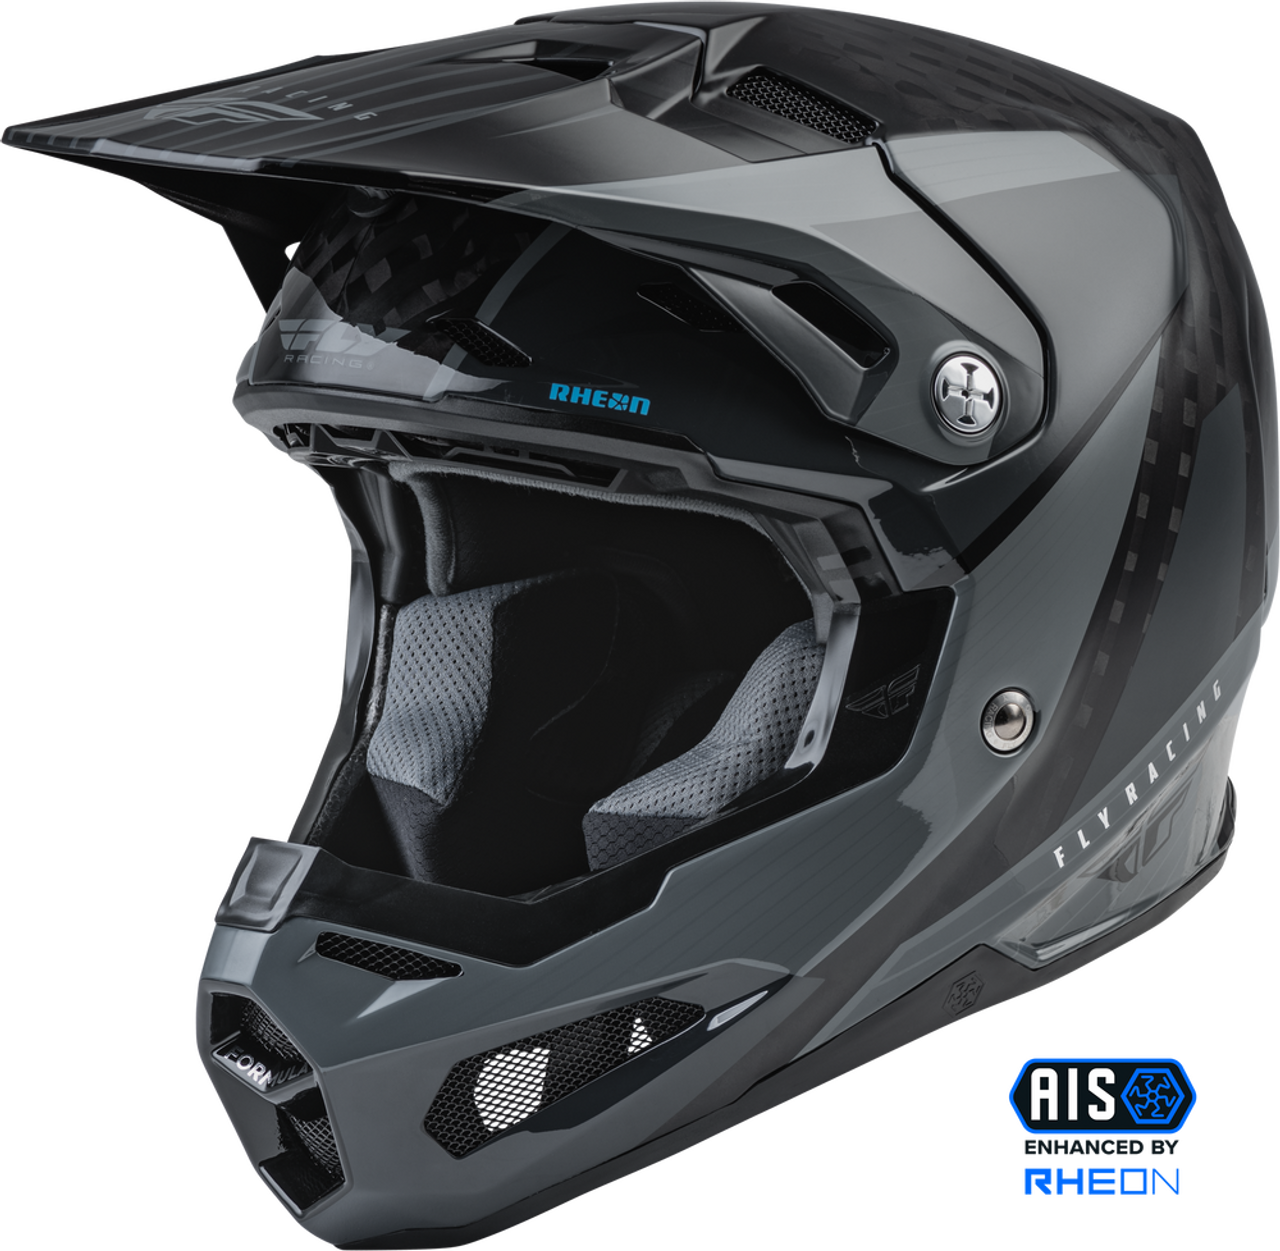 FLY RACING FORMULA CARBON PRIME HELMET YOUTH & ADULT